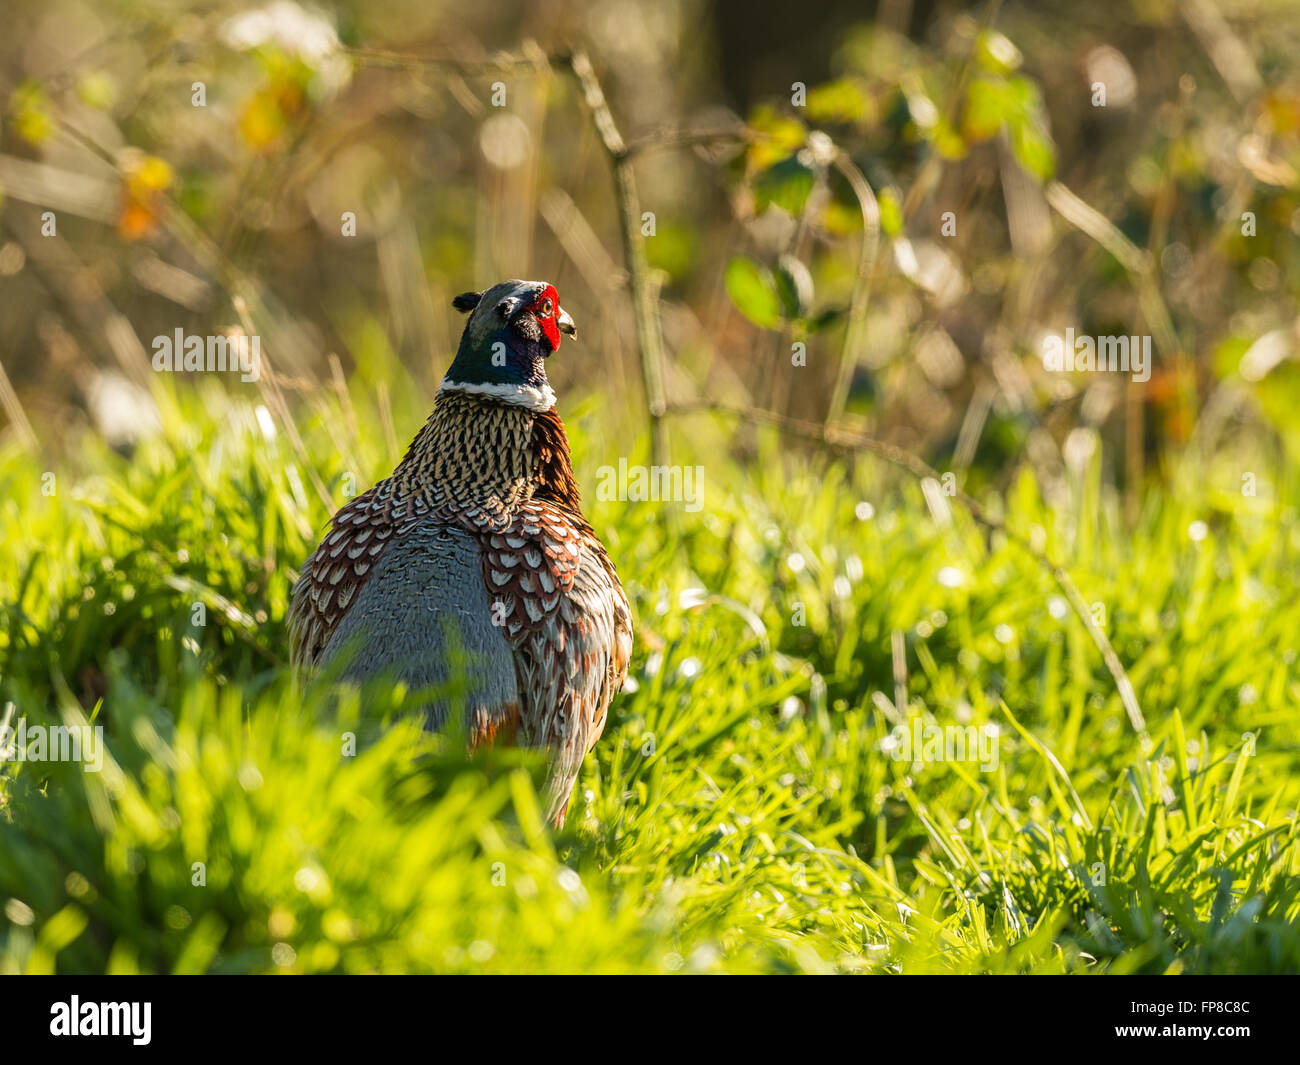 Beautiful British Ring-necked Pheasant (Phasianus colchicus) foraging in natural woodland forest setting. Stock Photo